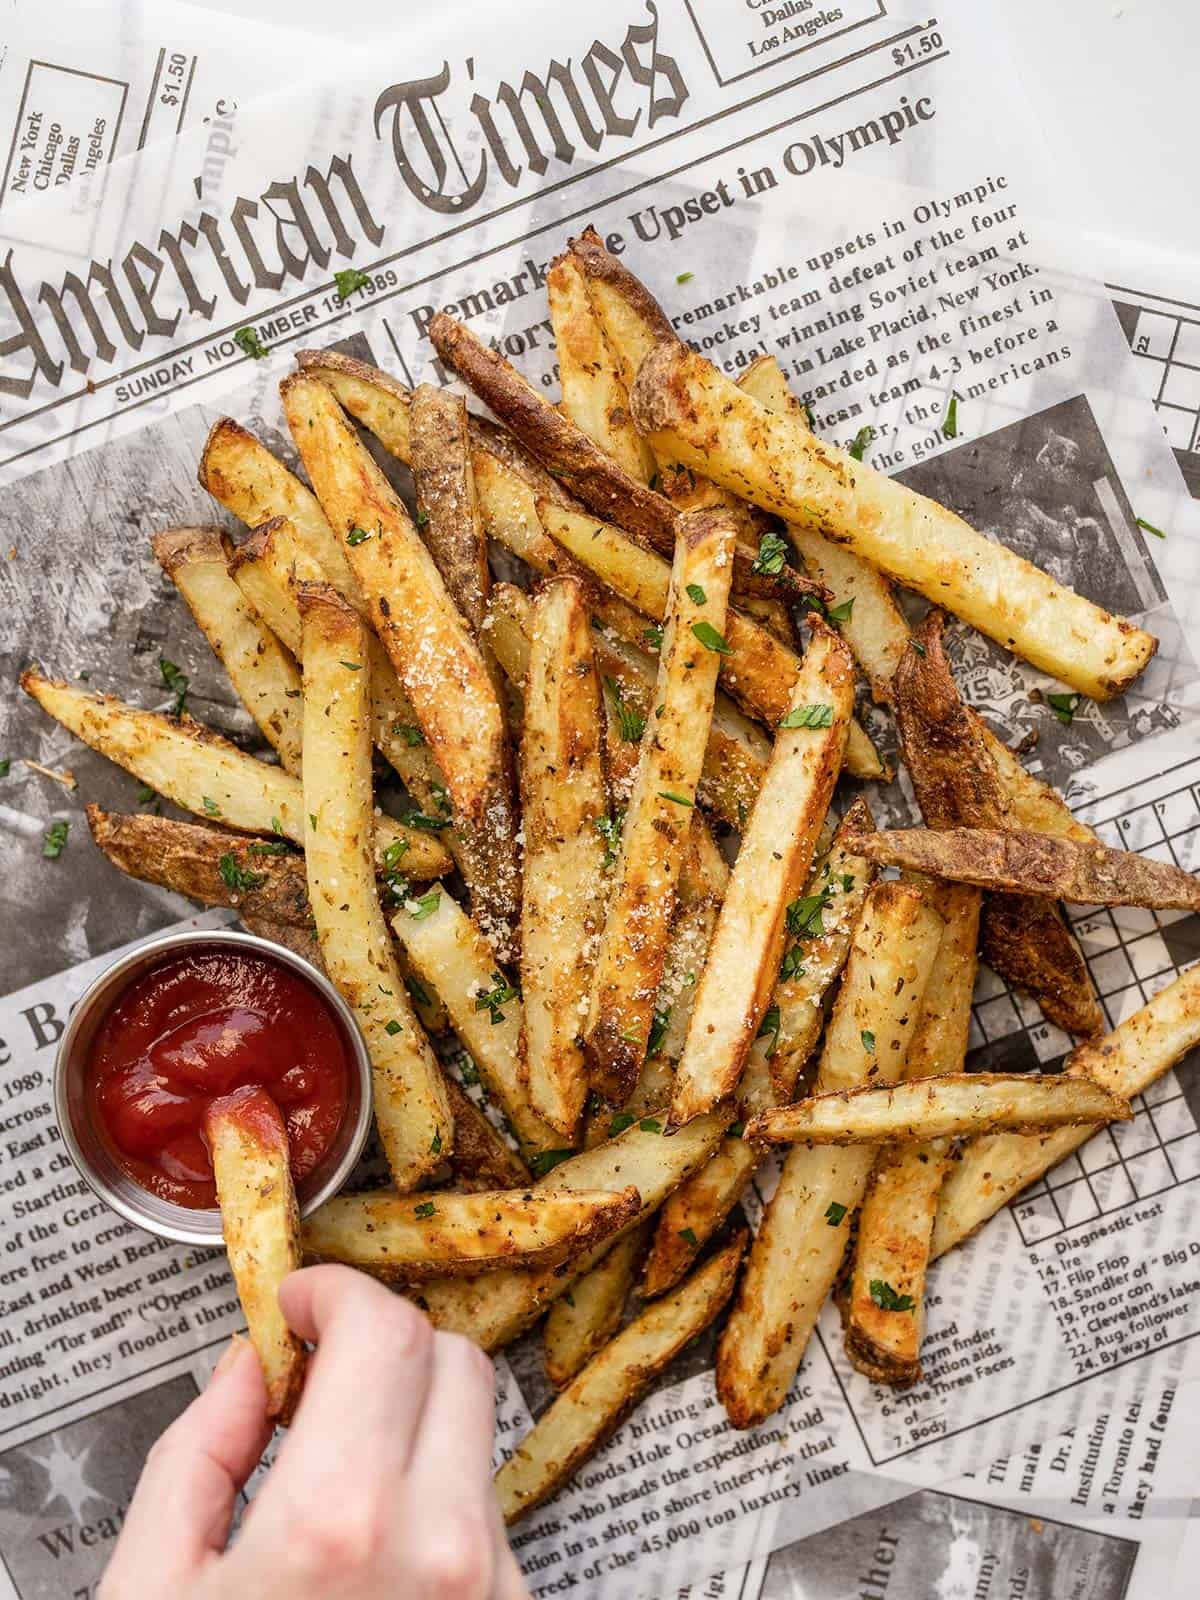 a hand dipping one garlic parmesan fry into ketchup next to a pile of fries